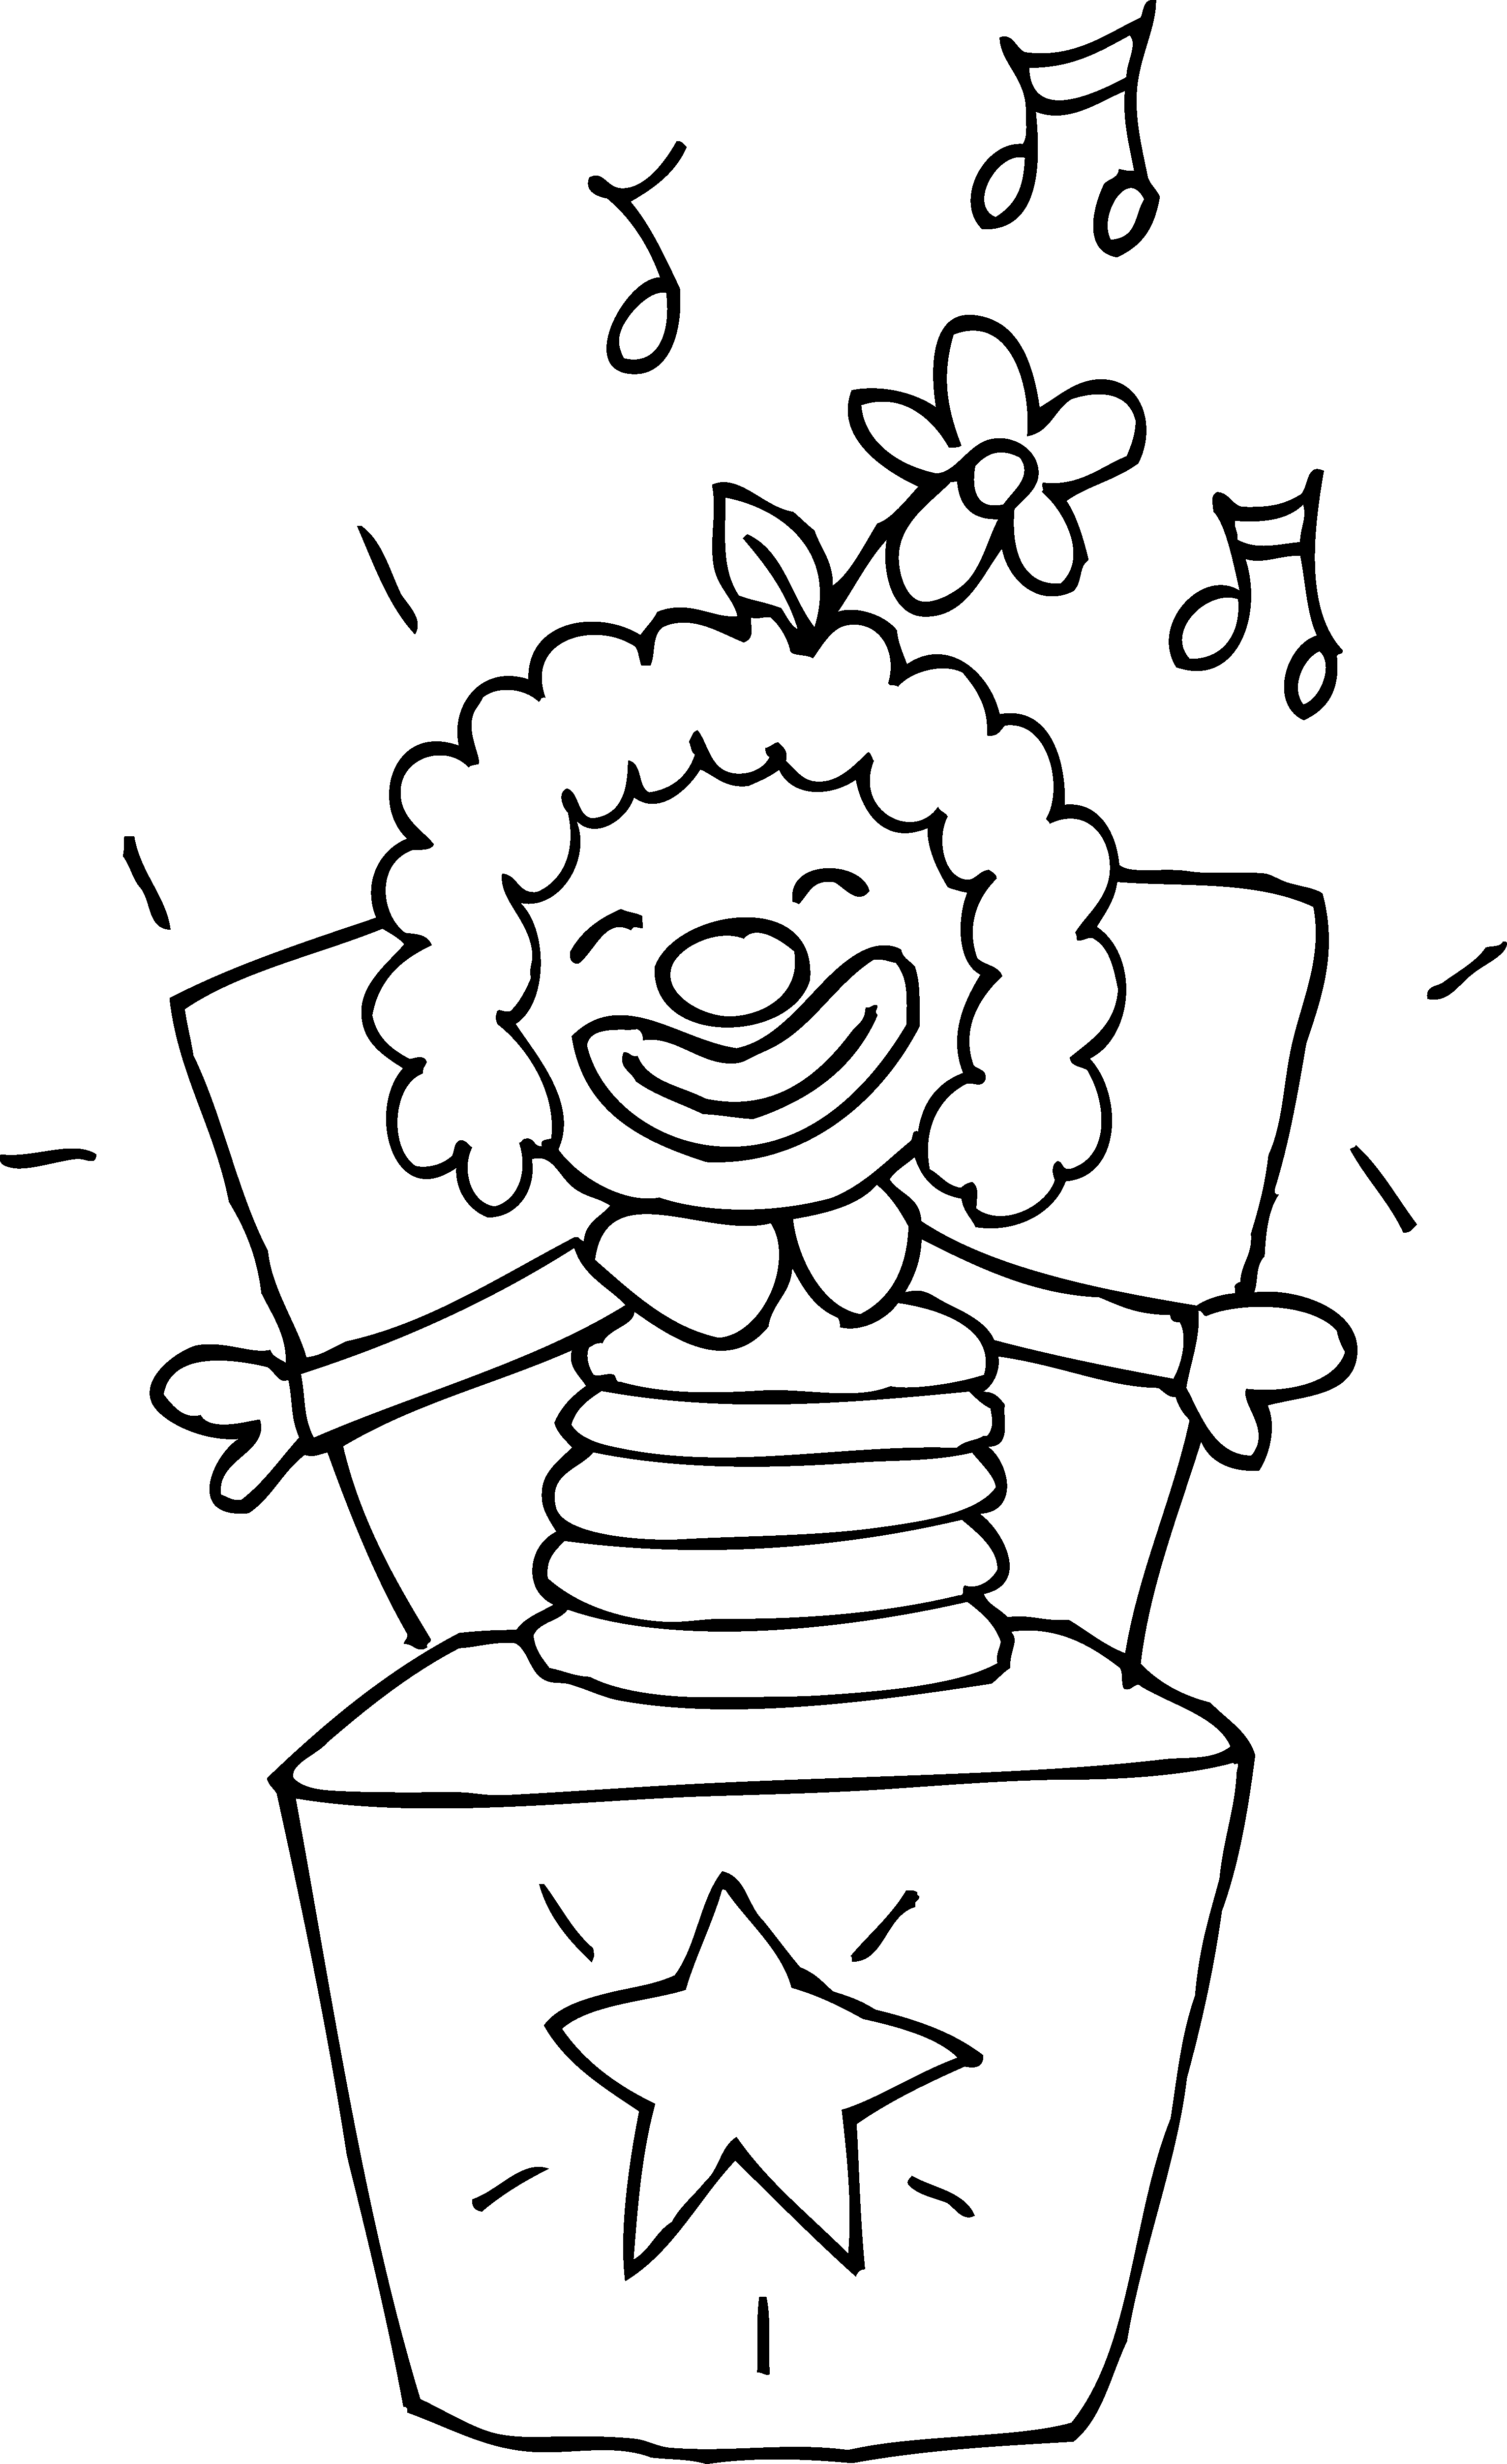 Toy clipart line art. Colorable jack in the